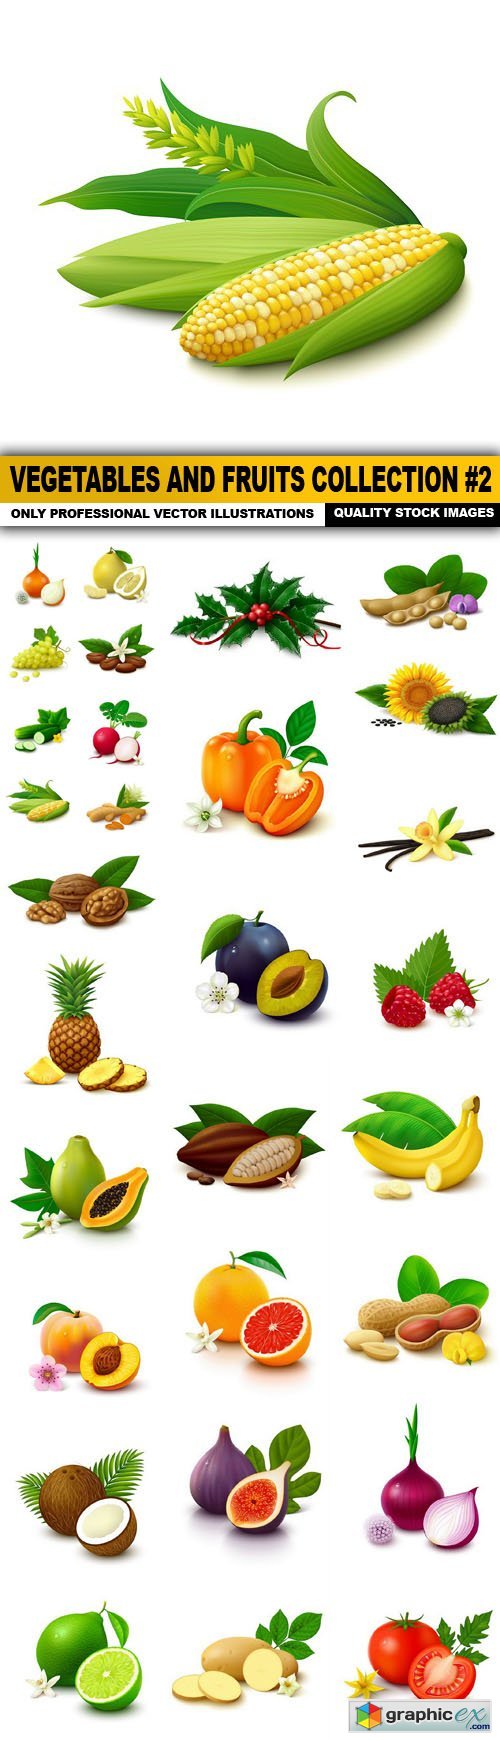 Vegetables And Fruits Collection #2 - 30 Vector